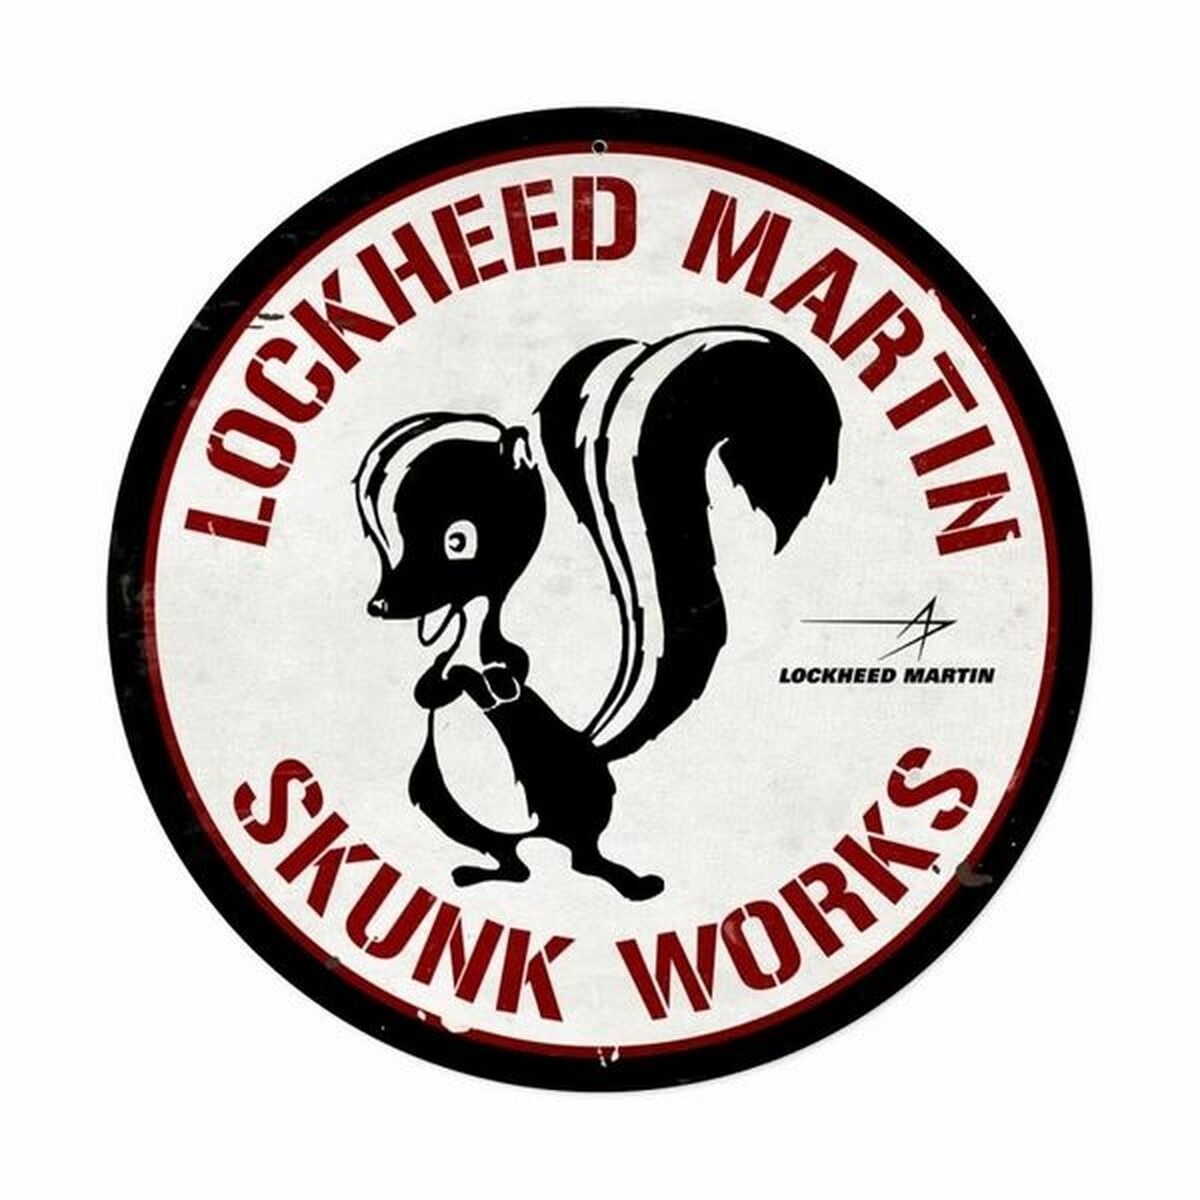 Skunk Works is an official pseudonym for Lockheed Martin's Advanced Development Programs (ADP), formerly called Lockheed Advanced Development Projects.